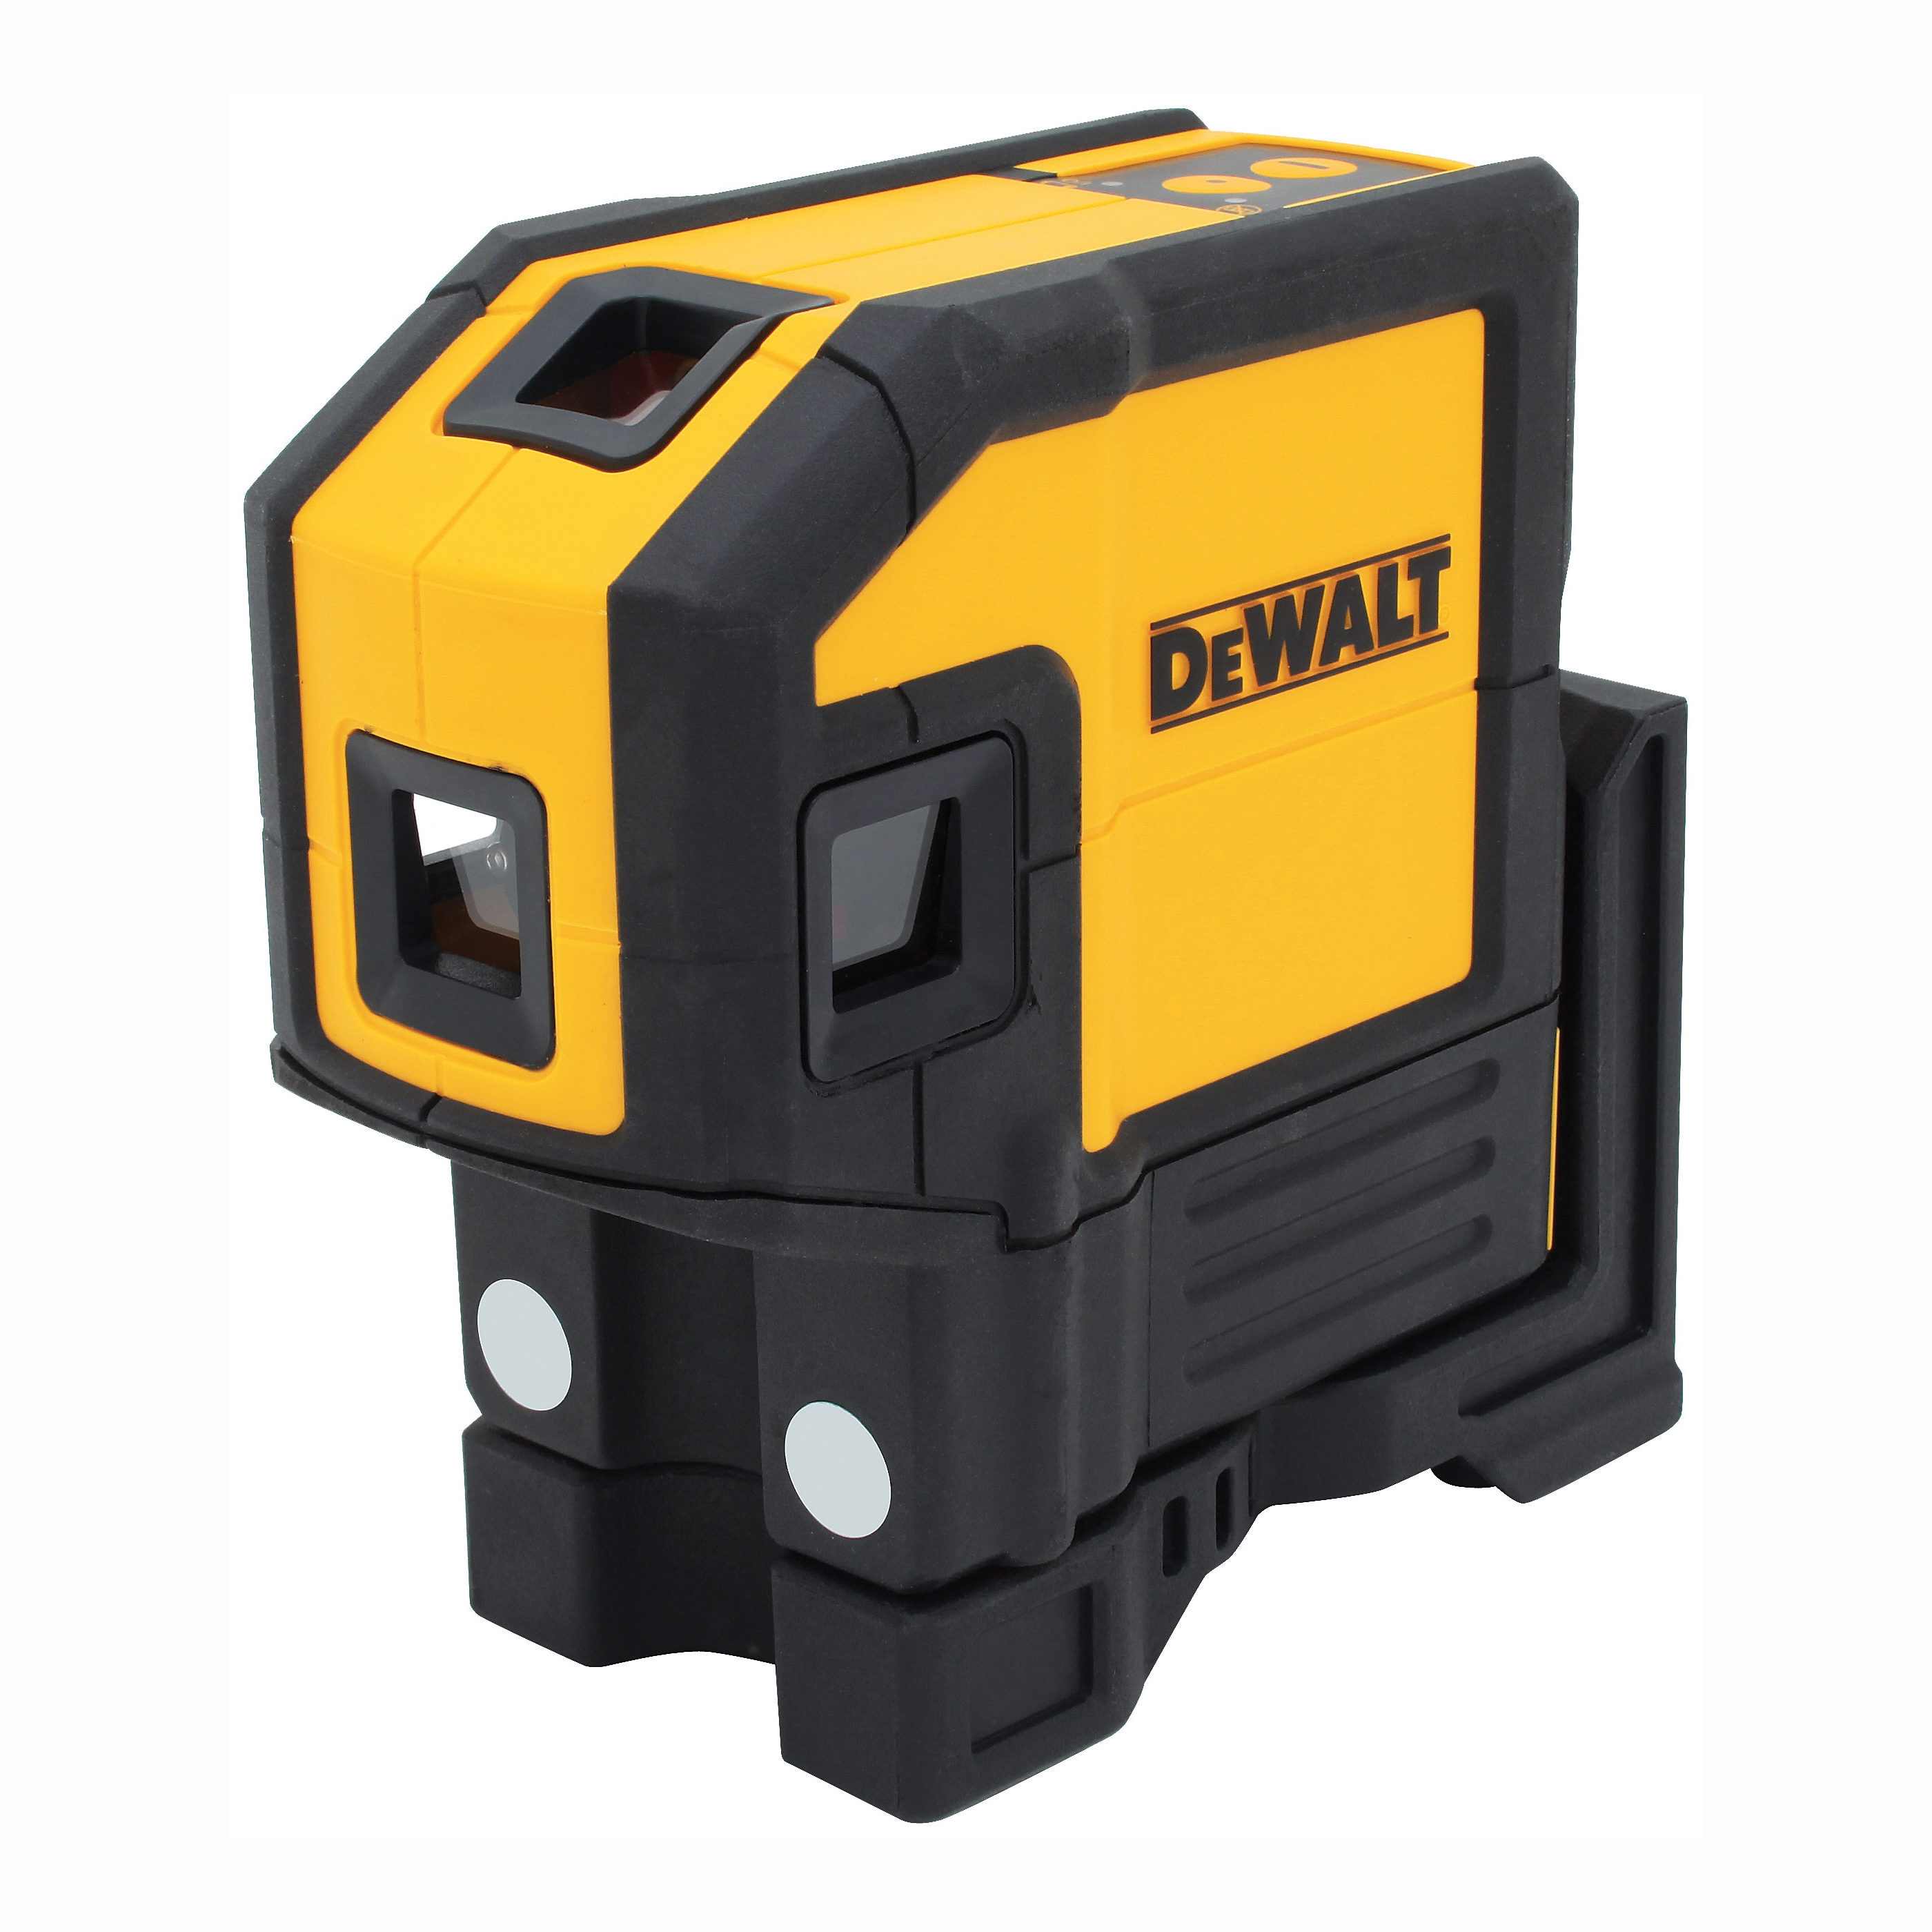 DW0851 Laser Level, 165 ft, +/-1/8 in at 100 ft Accuracy, 5-Dot, Red Laser